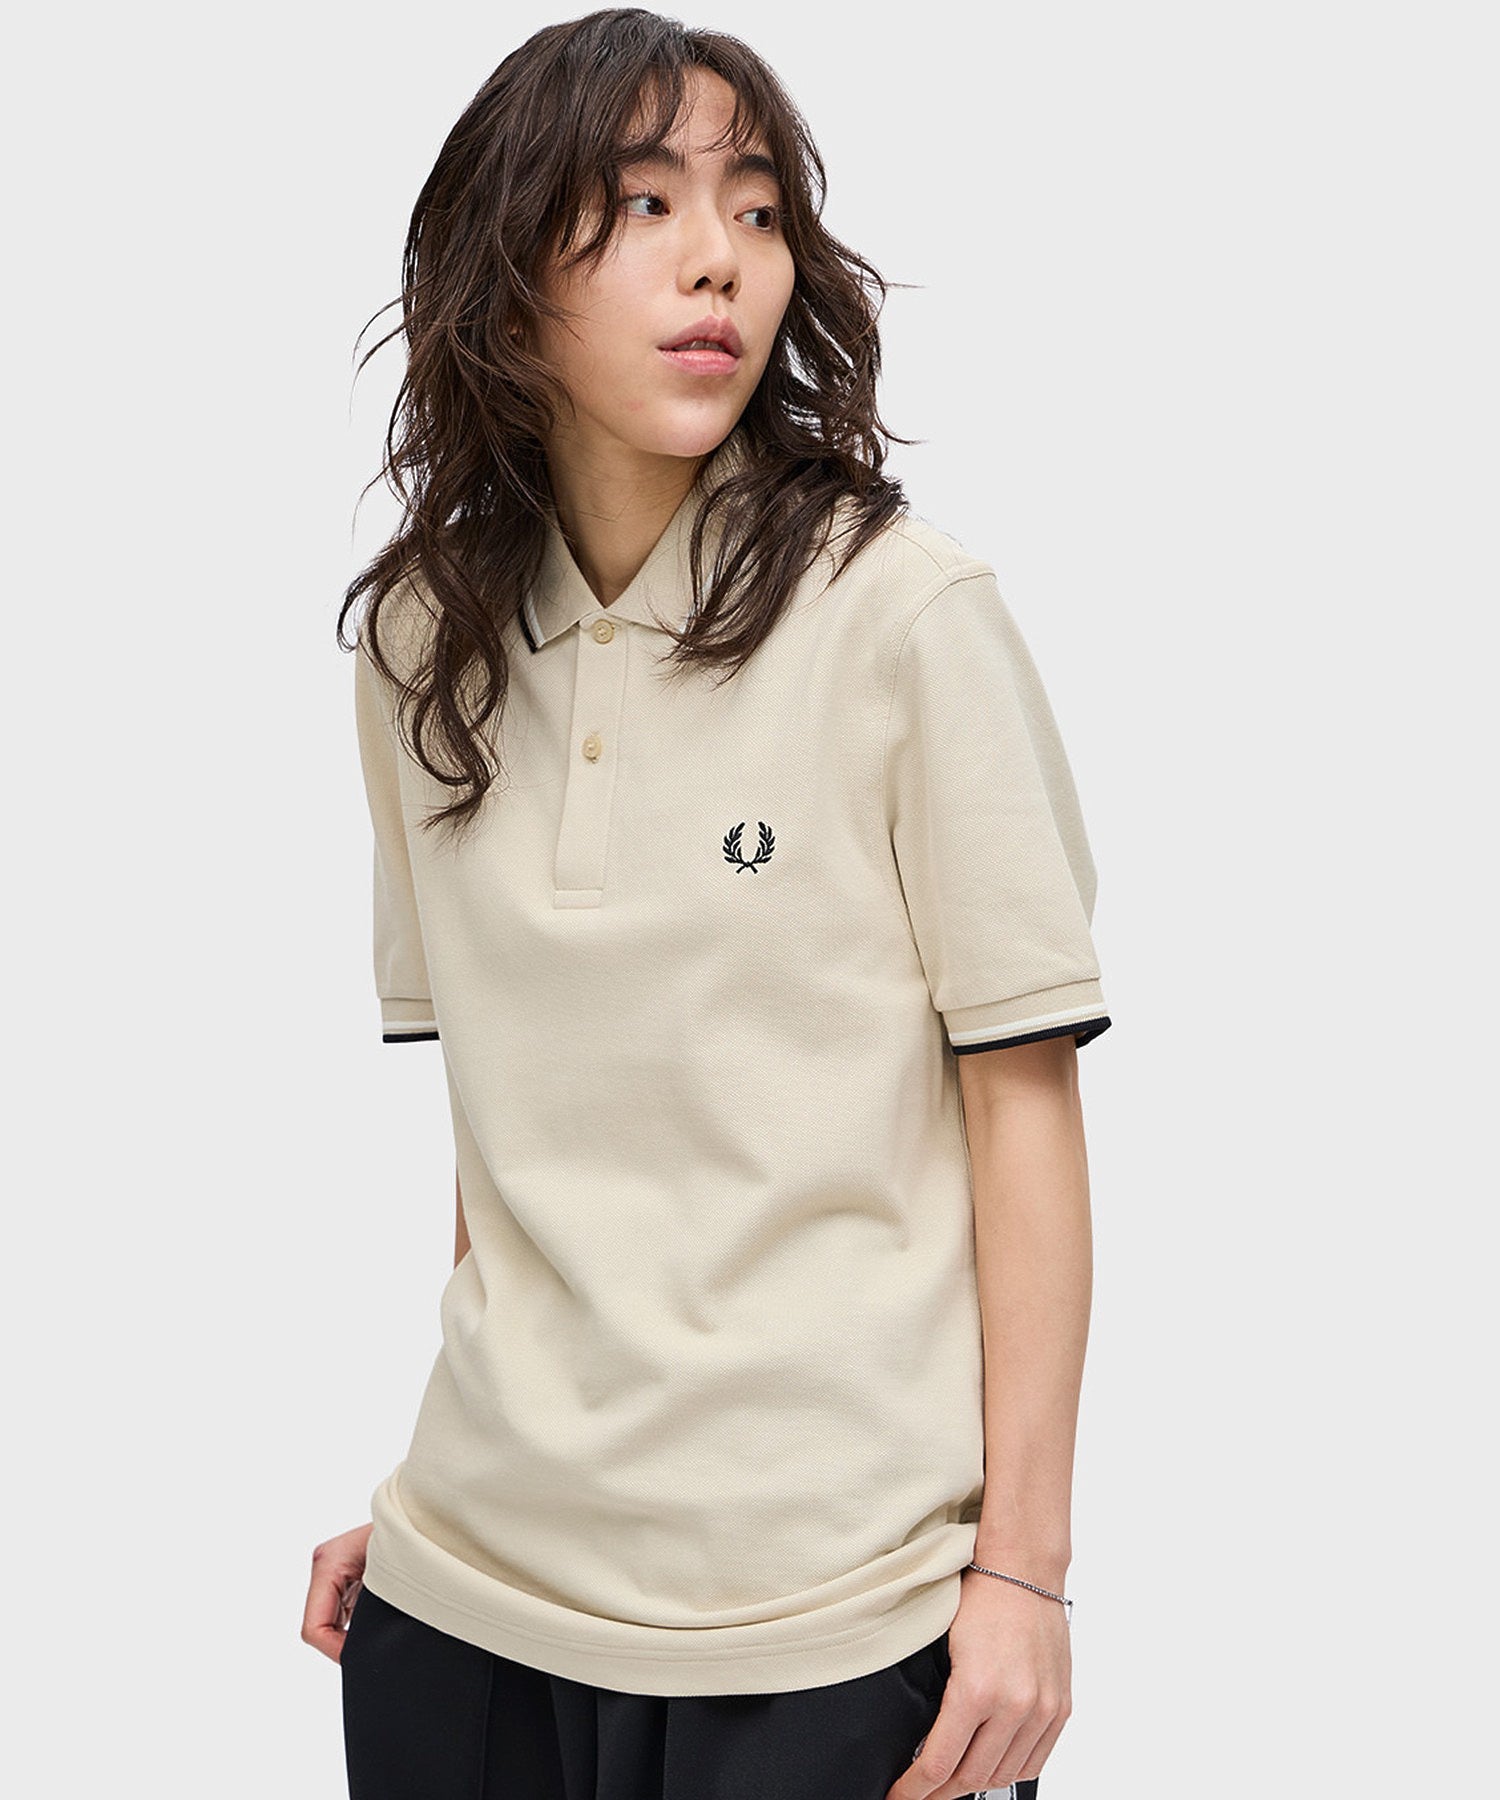 FRED PERRY/フレッドペリー/TWIN TIPPED FRED PERRY SHIRT/M3600/U87